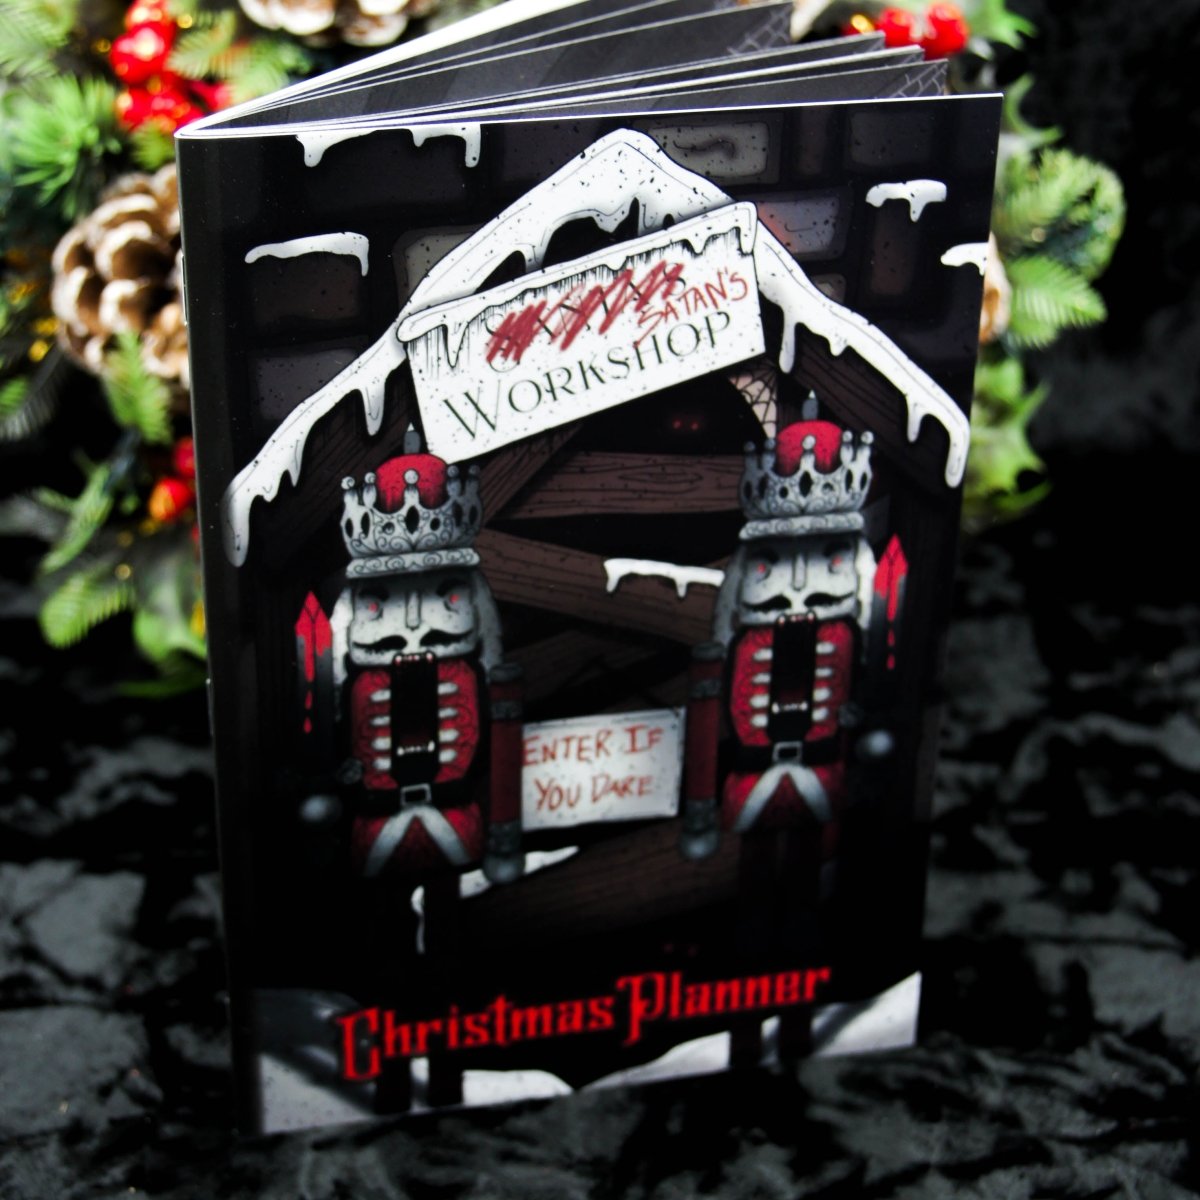 Gothic Christmas Planner - Satan's Workshop - The Gothic Stationery Company - Notebooks